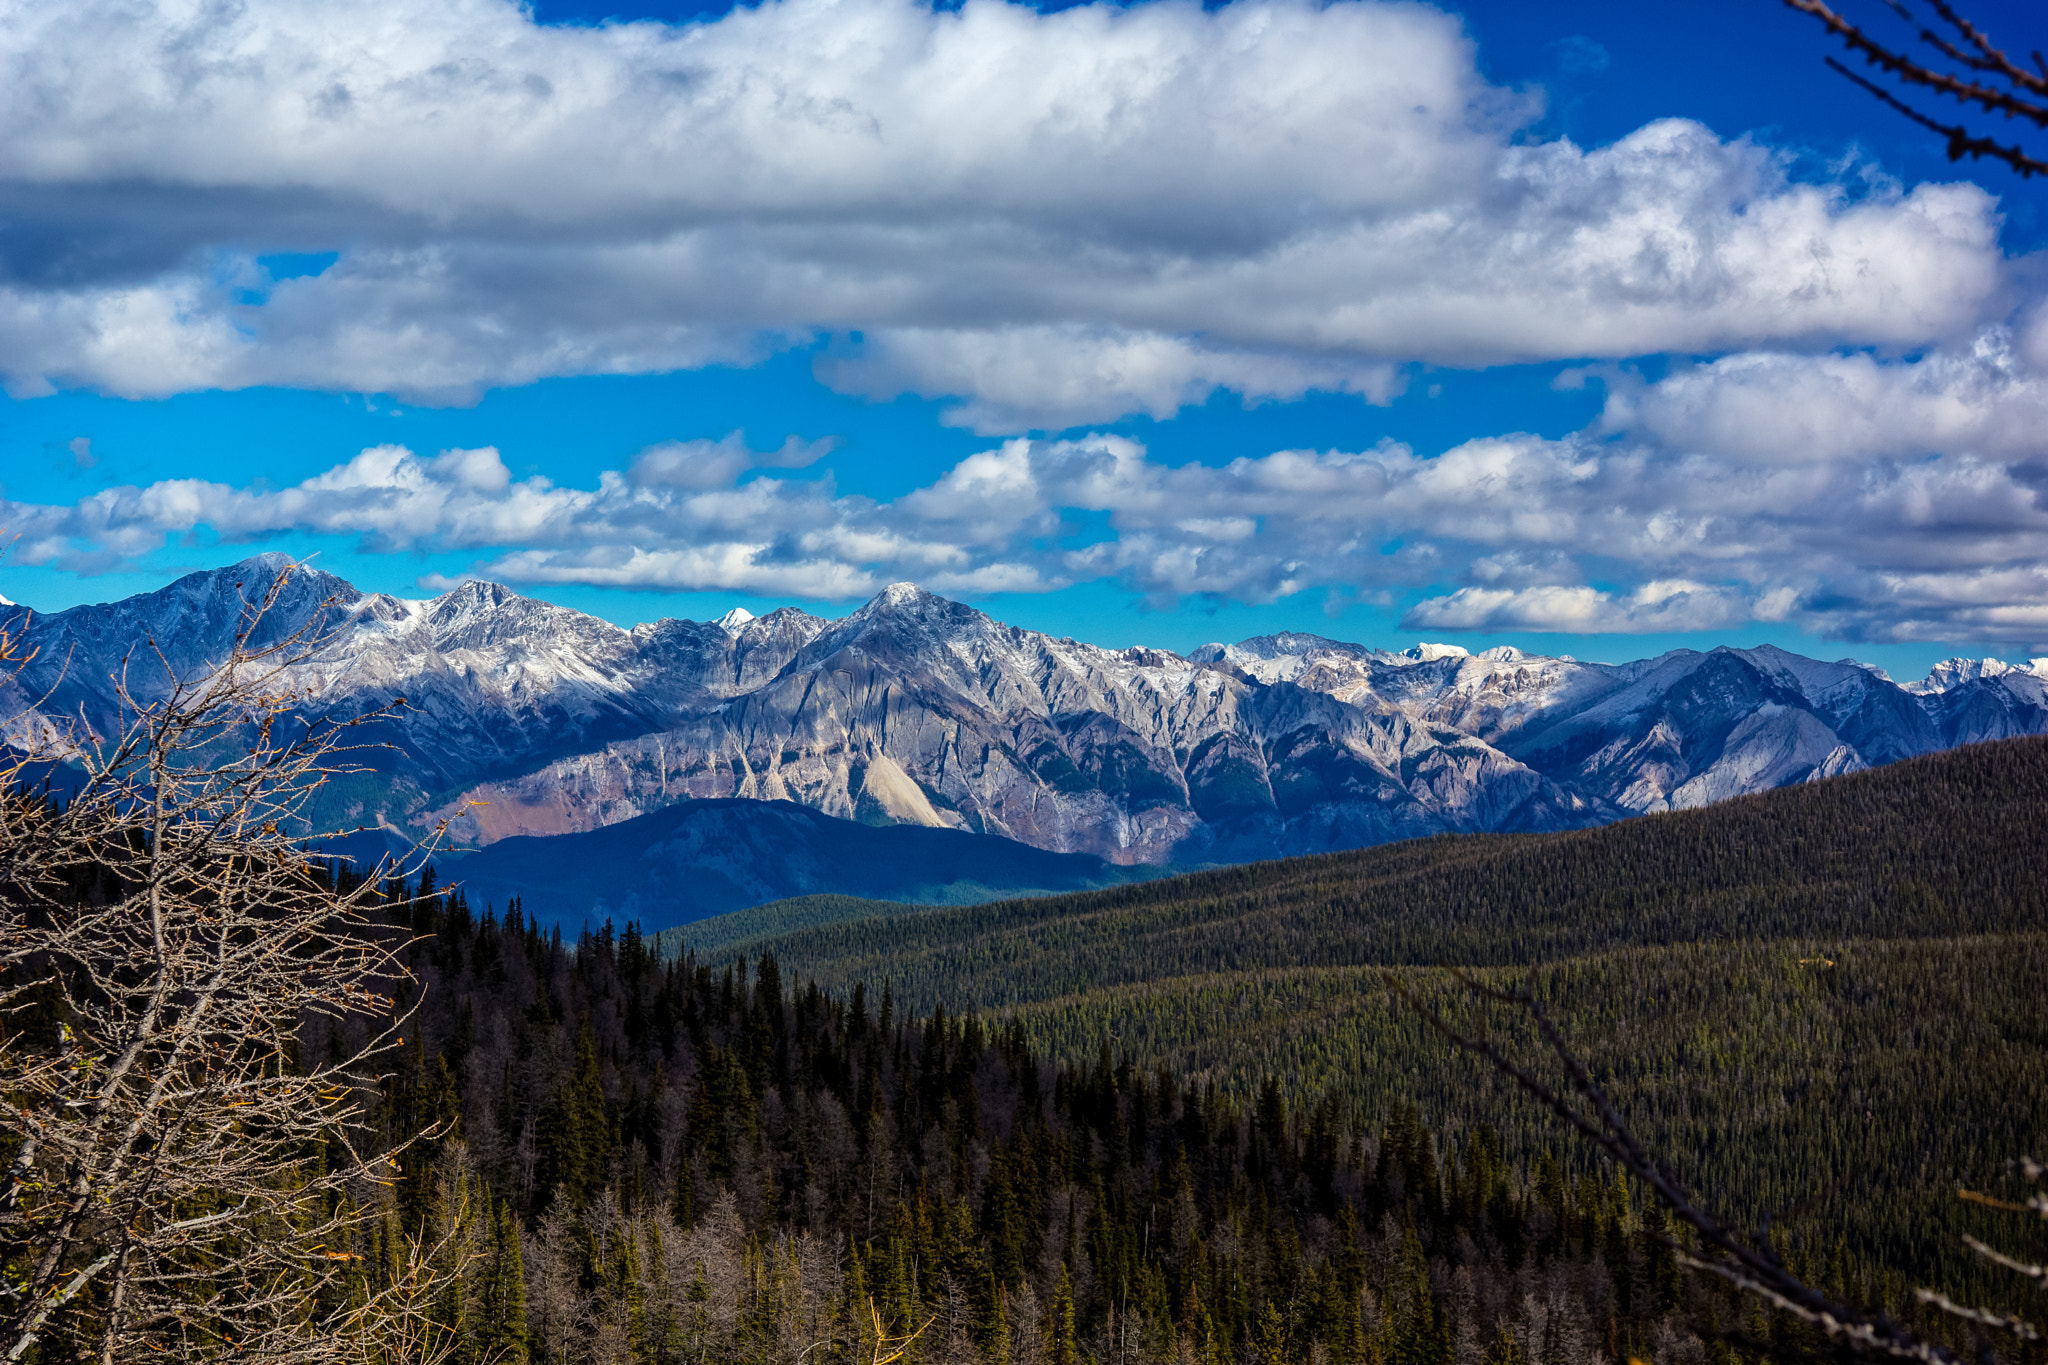 Sony SLT-A77 sample photo. North from anirca pass, banff np photography